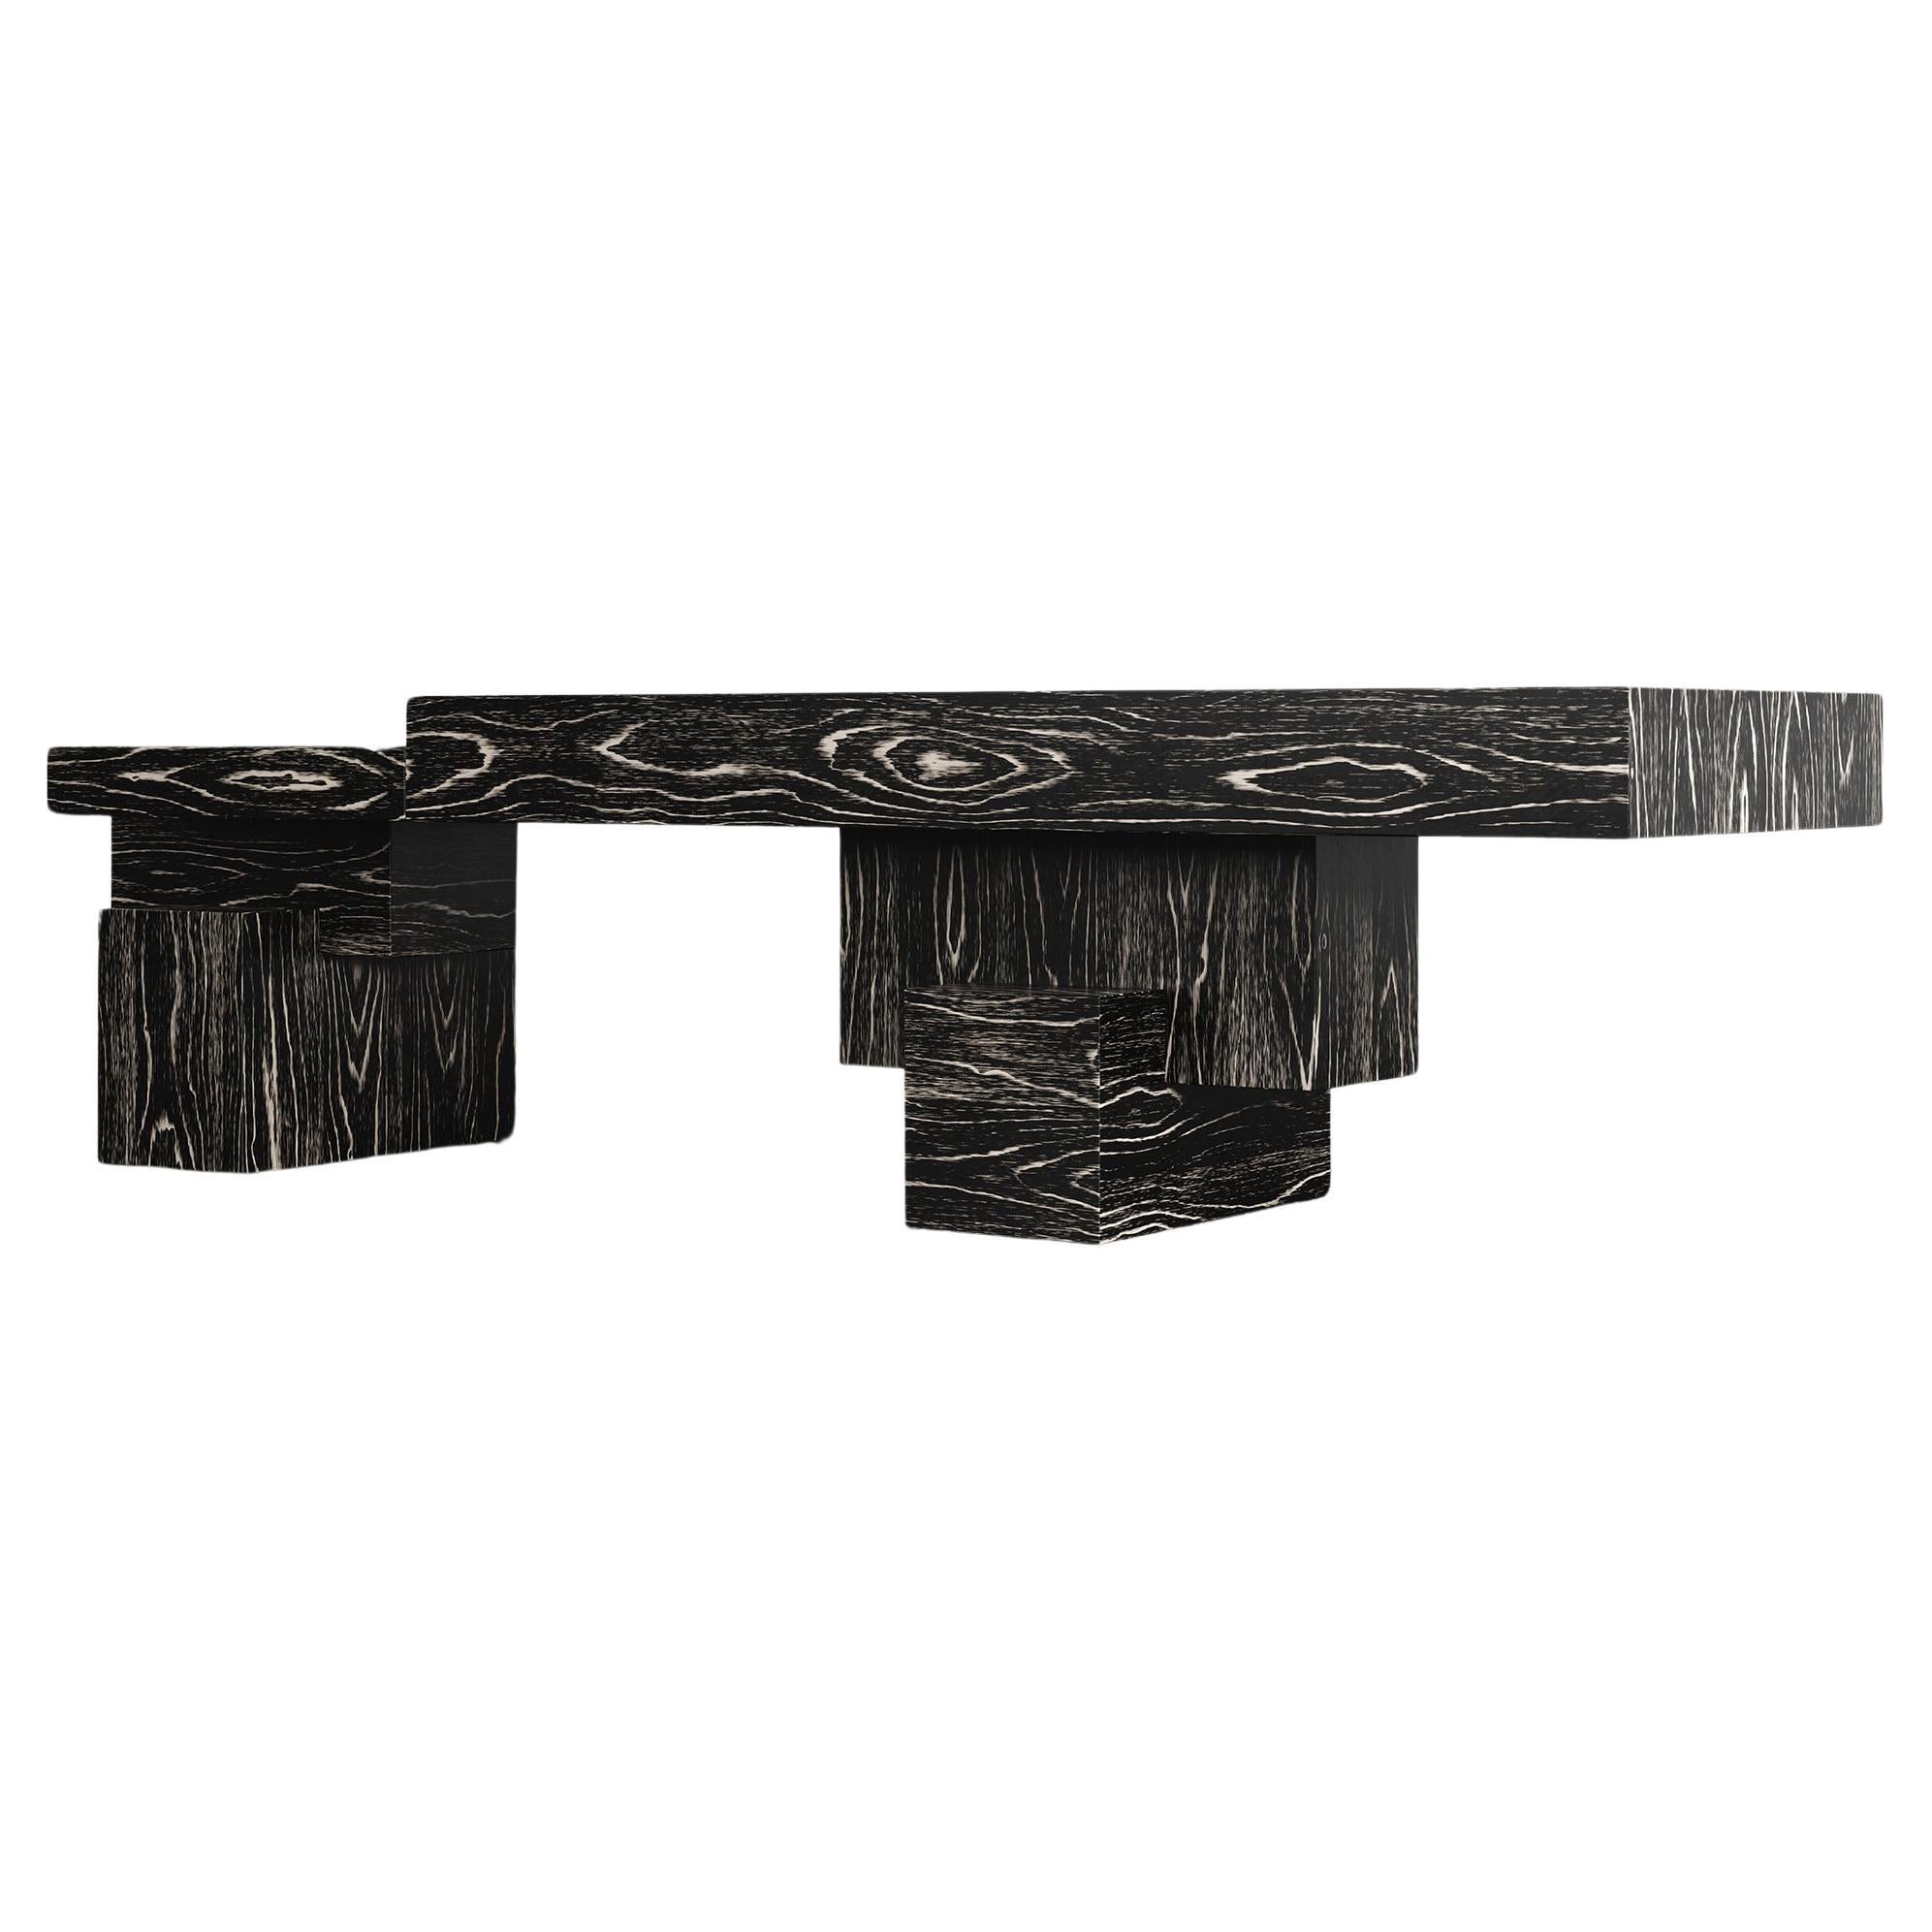 LINK COFFEE TABLE - Modern Design with Macassar black/white groove For Sale